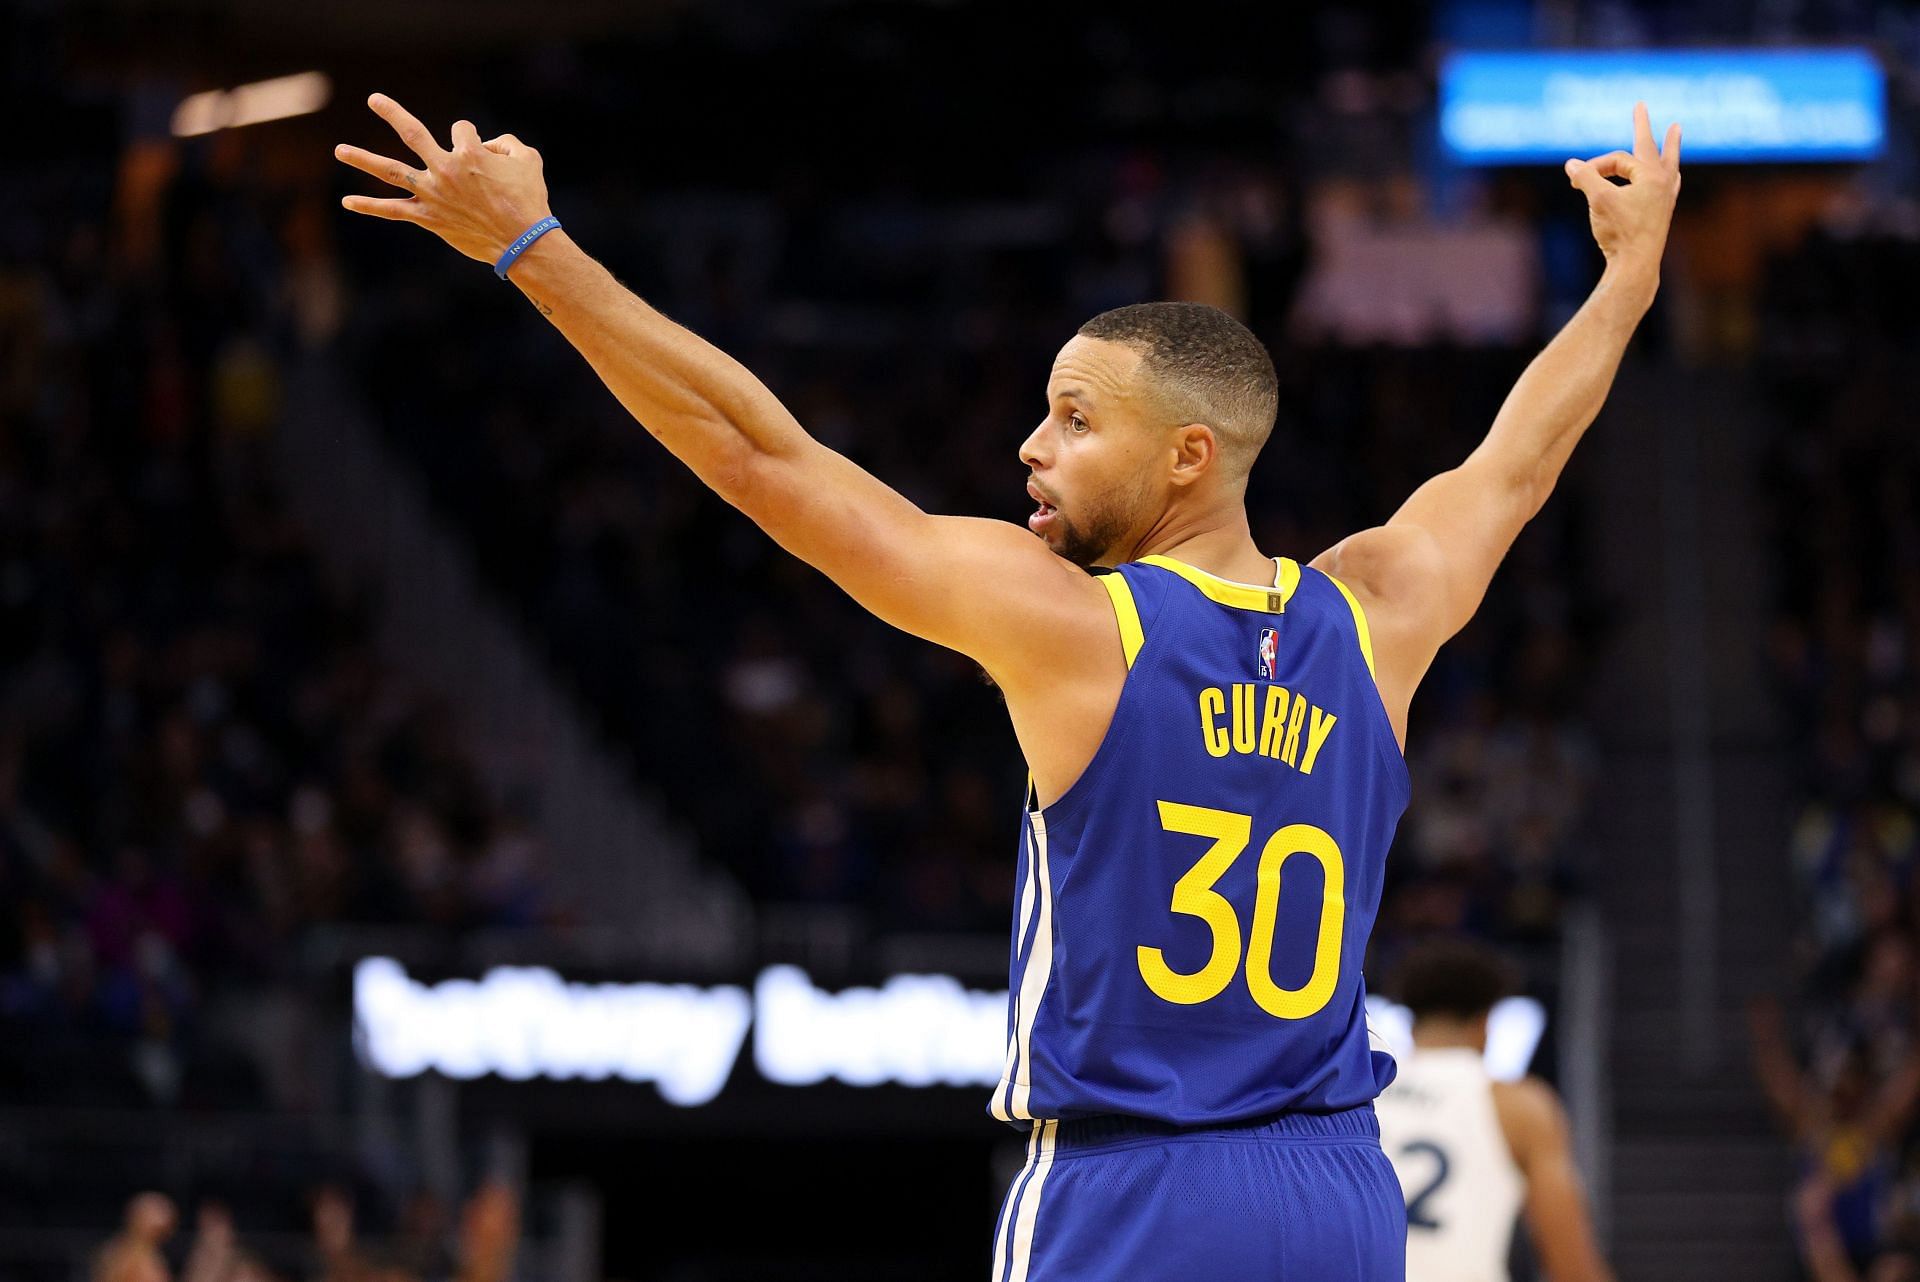 Stephen Curry in action during the game between the Minnesota Timberwolves and Golden State Warriors.